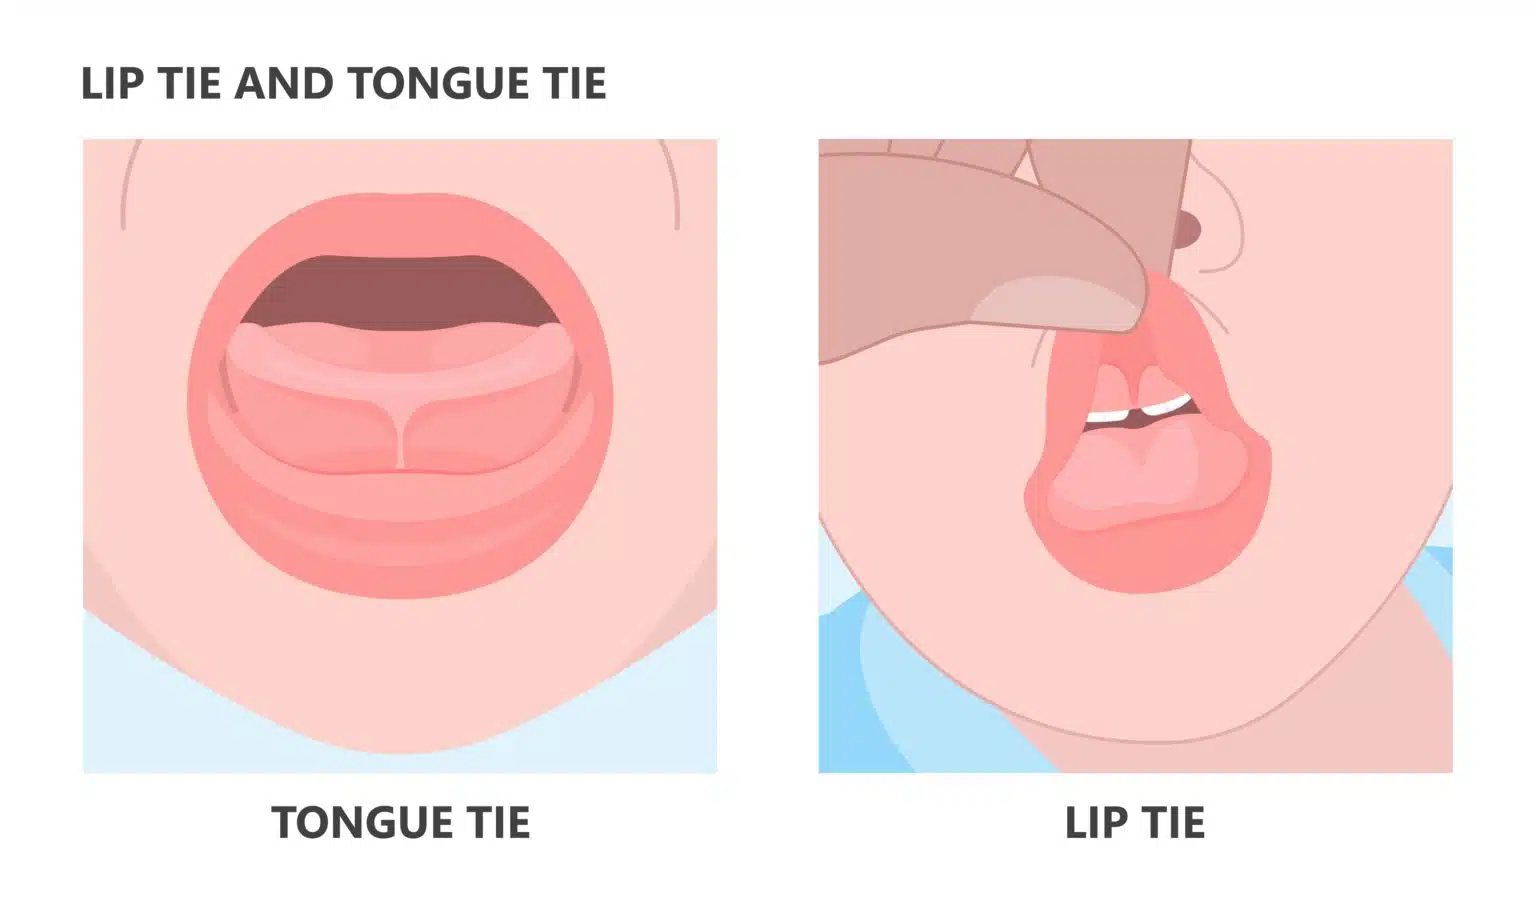 Difference Between Lip Tie And Tongue Tie